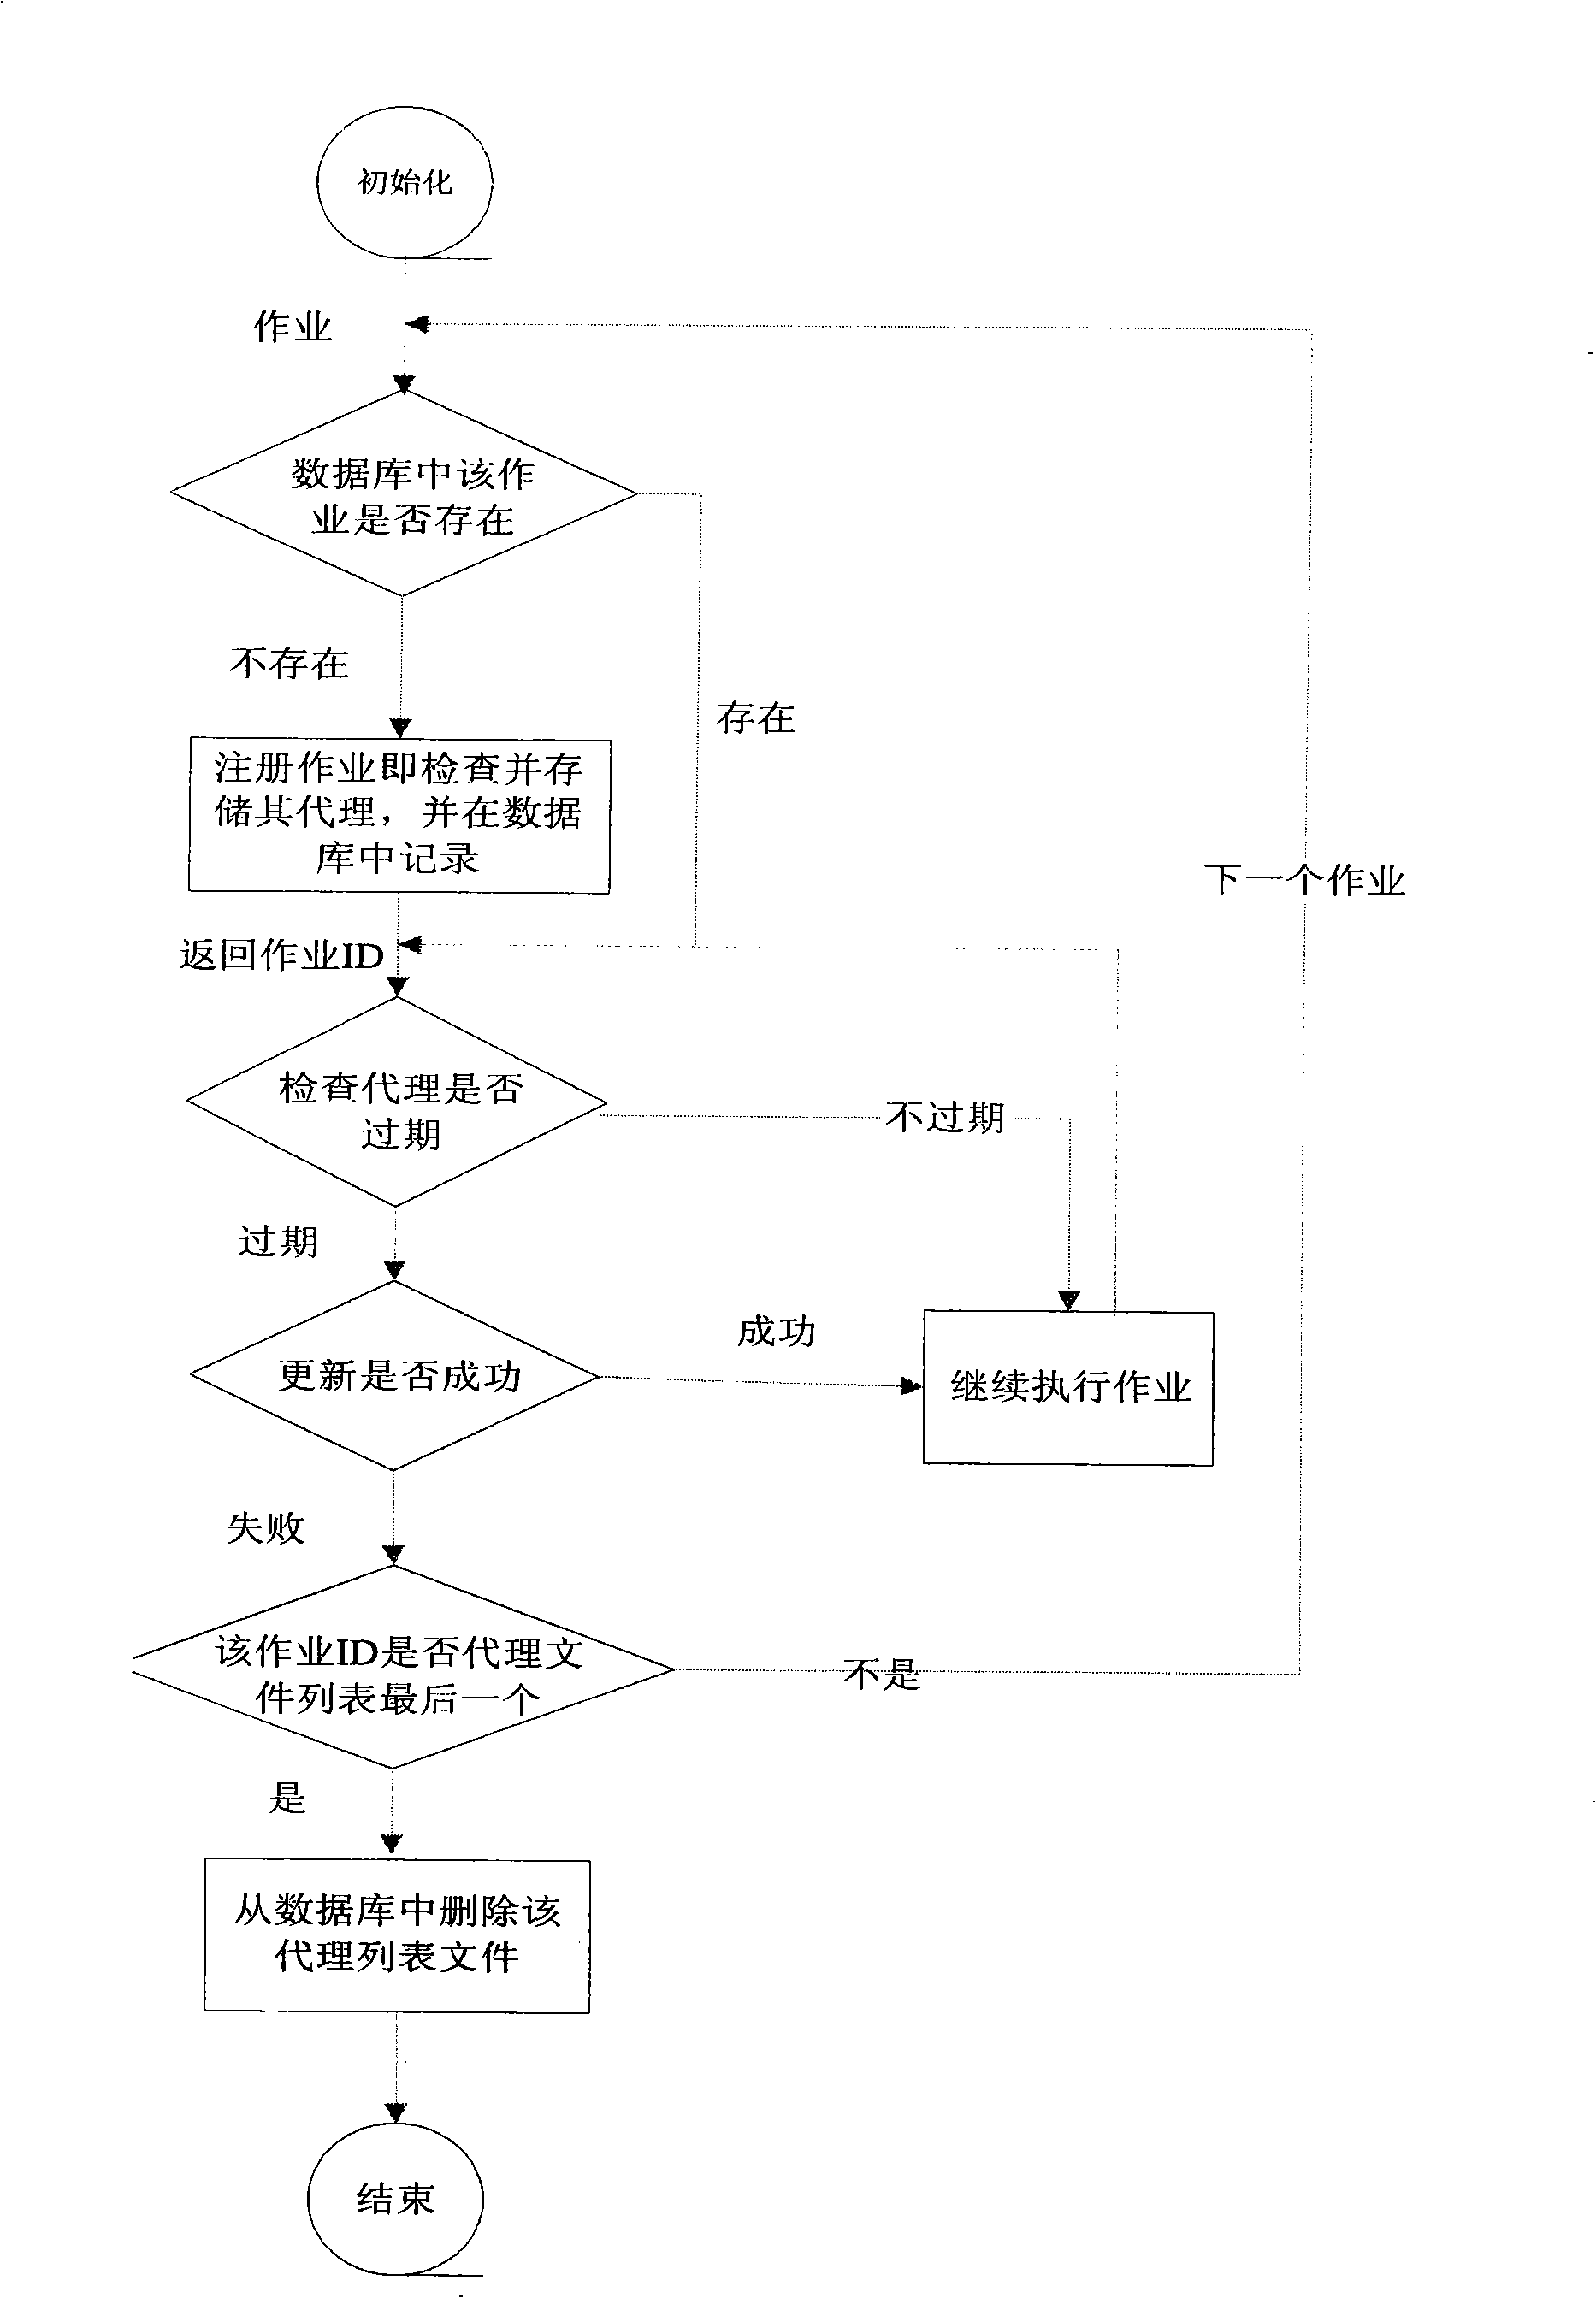 Implementing method of network security system capable of self-updating letter of representation